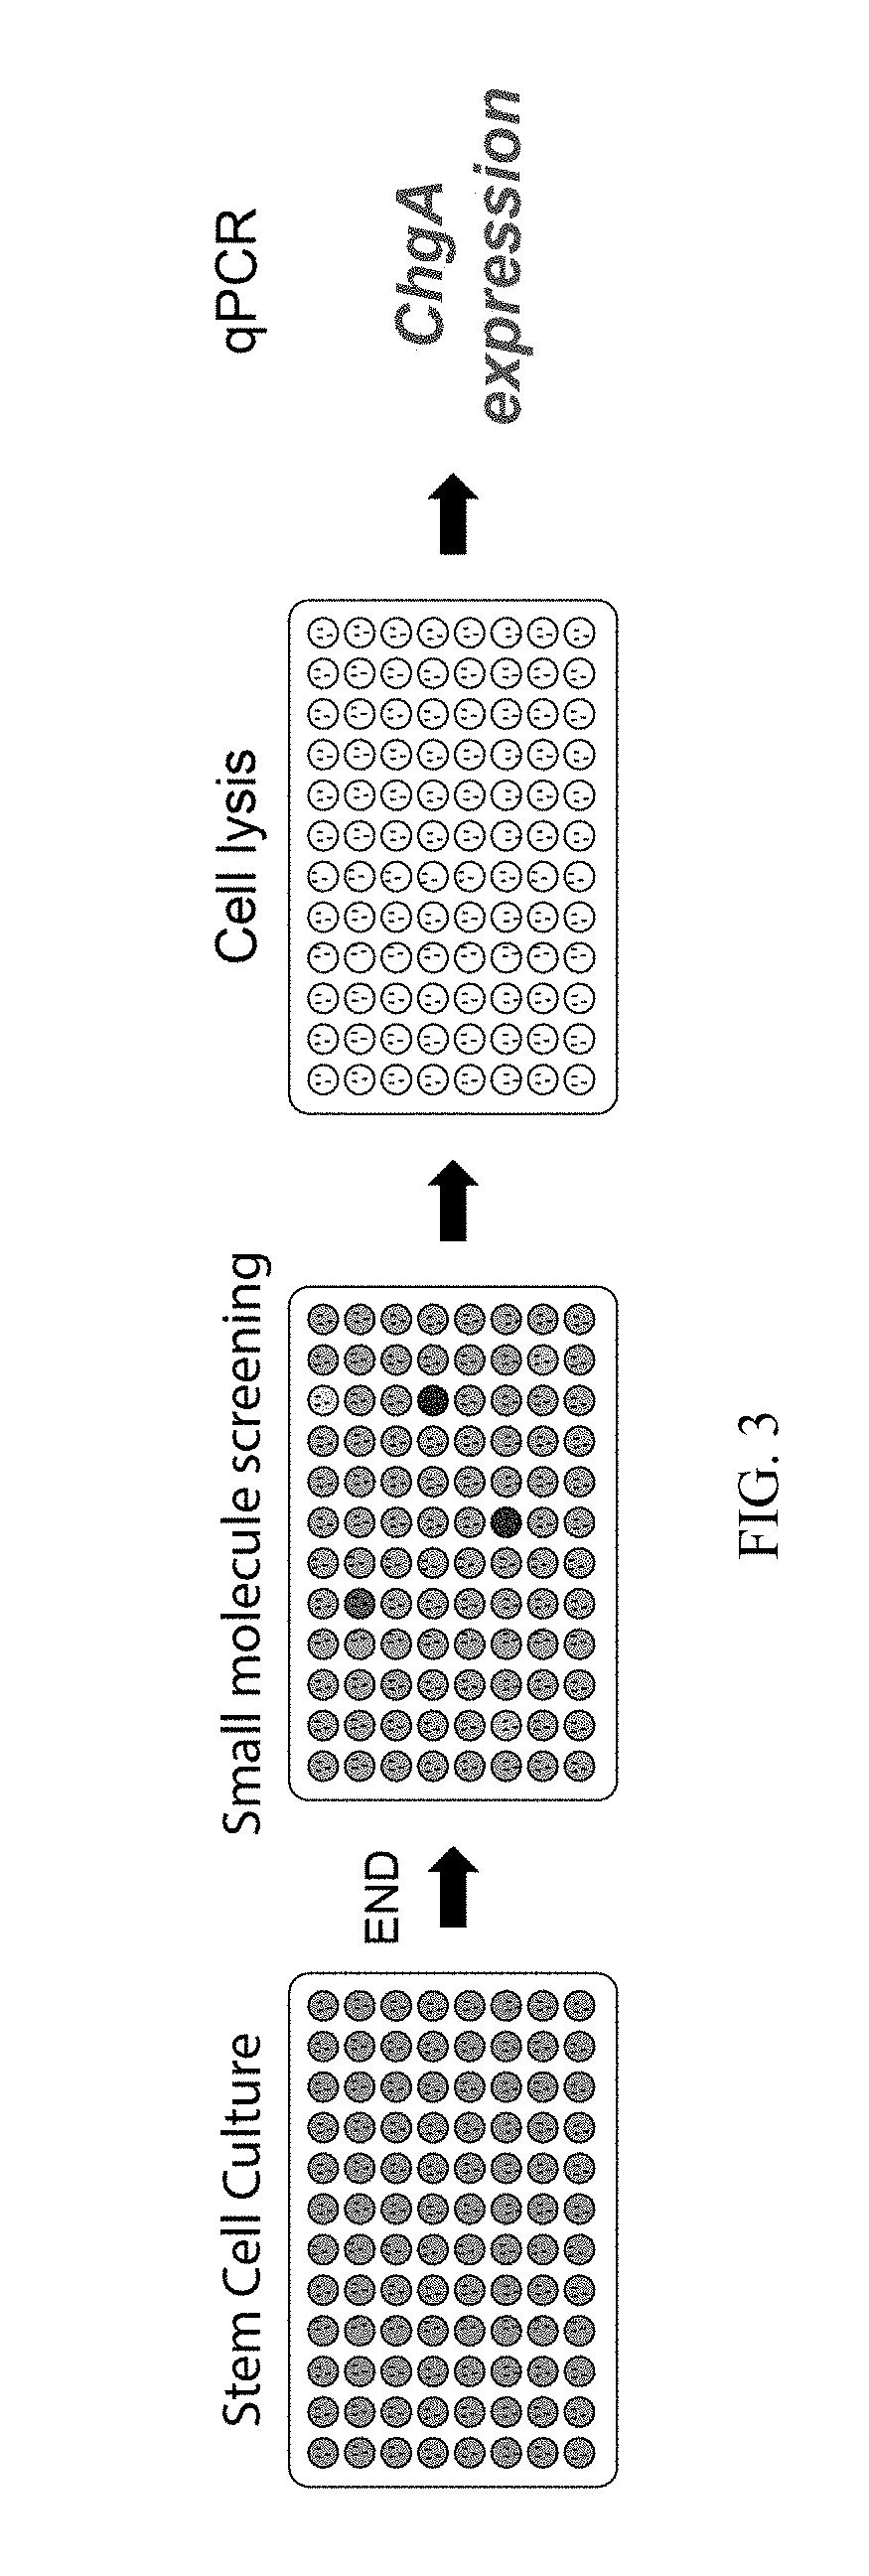 Production of Differentiated Enteroendocrine Cells and Insulin Producing Cells